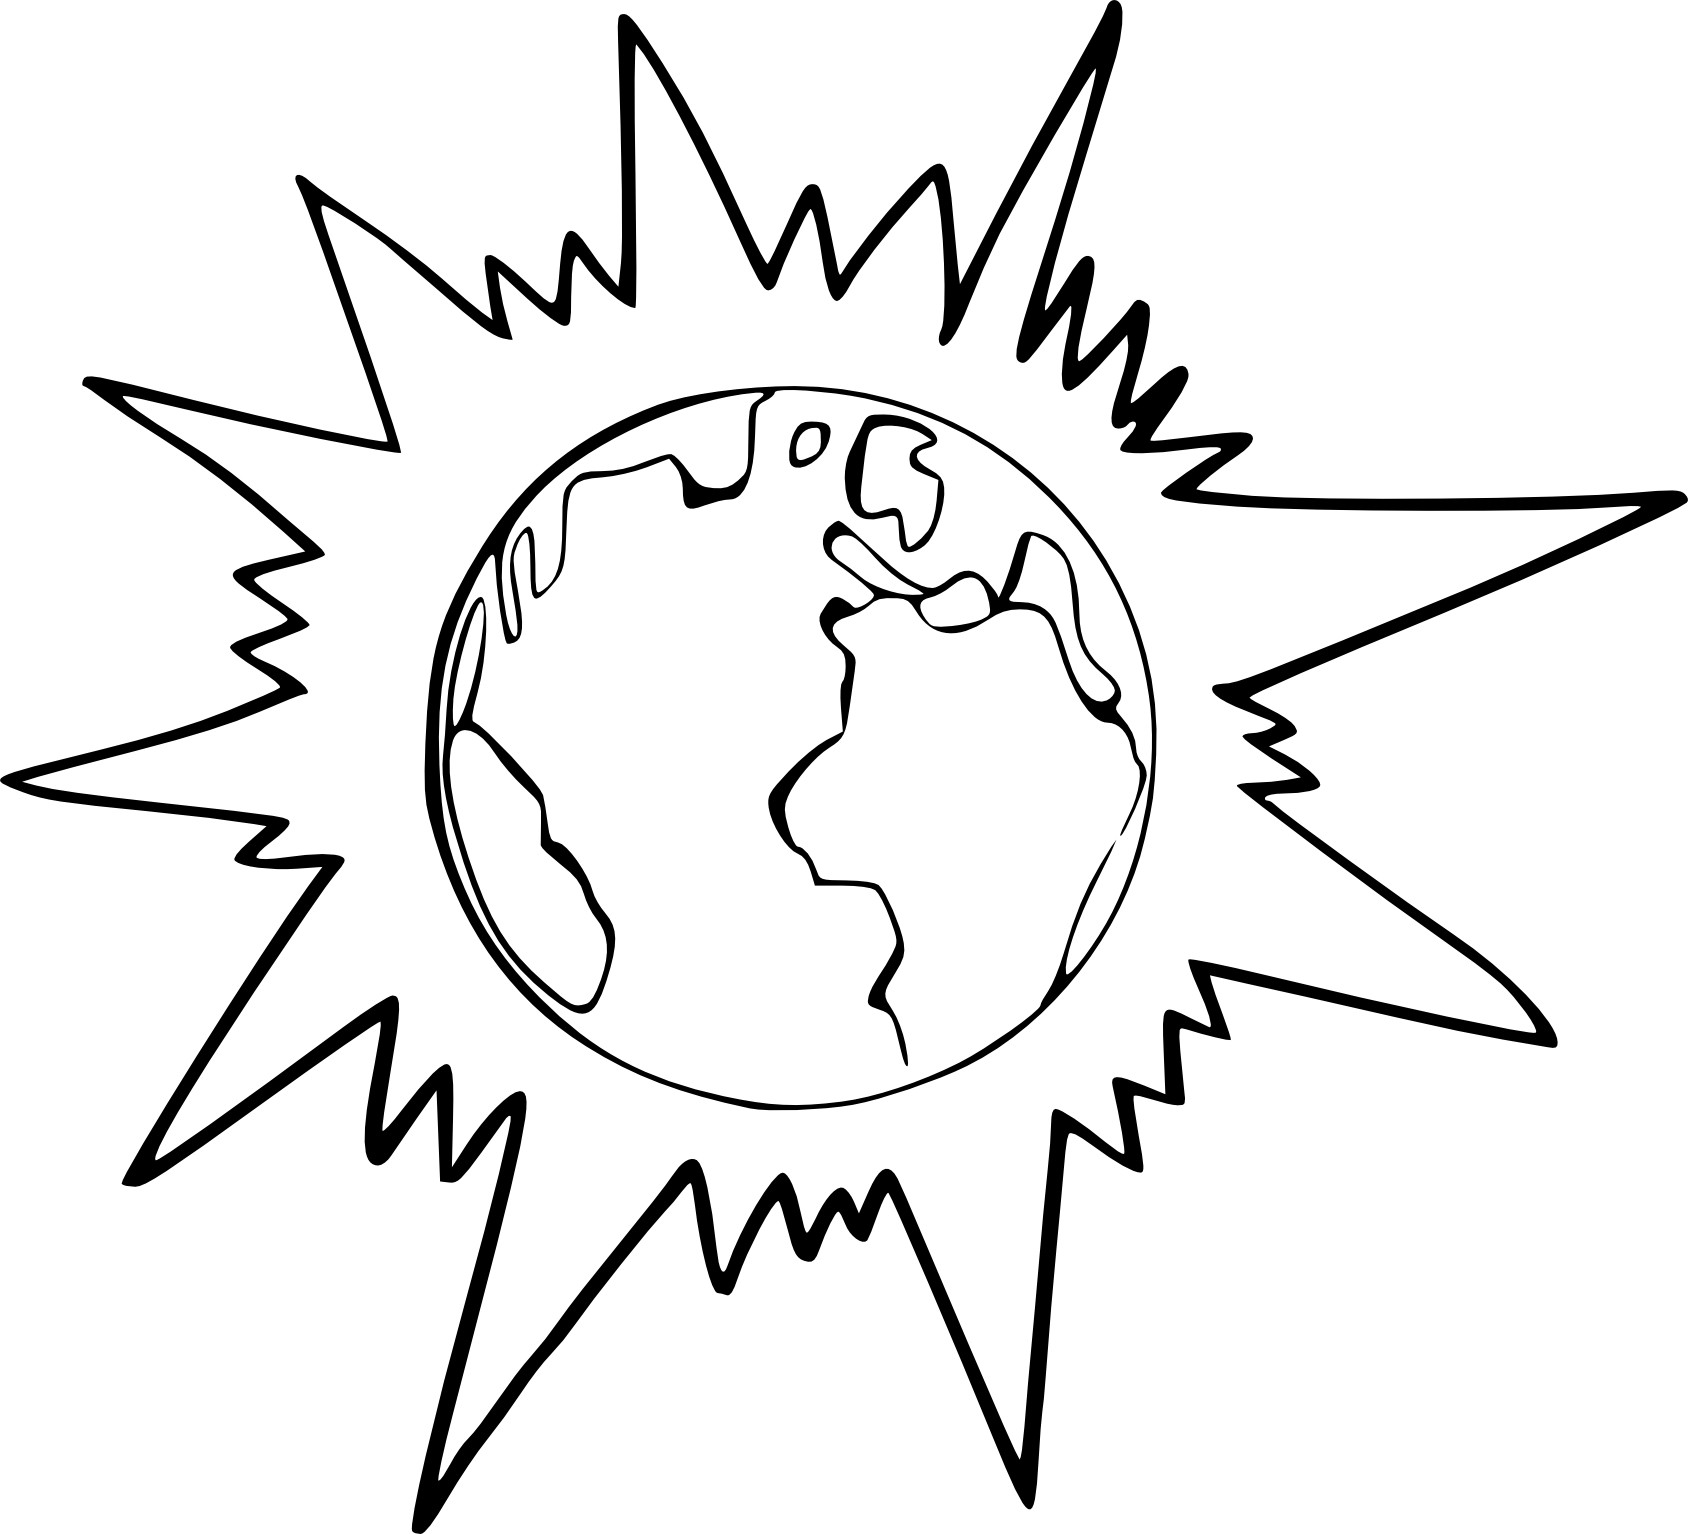 Planet Earth And Sun coloring page